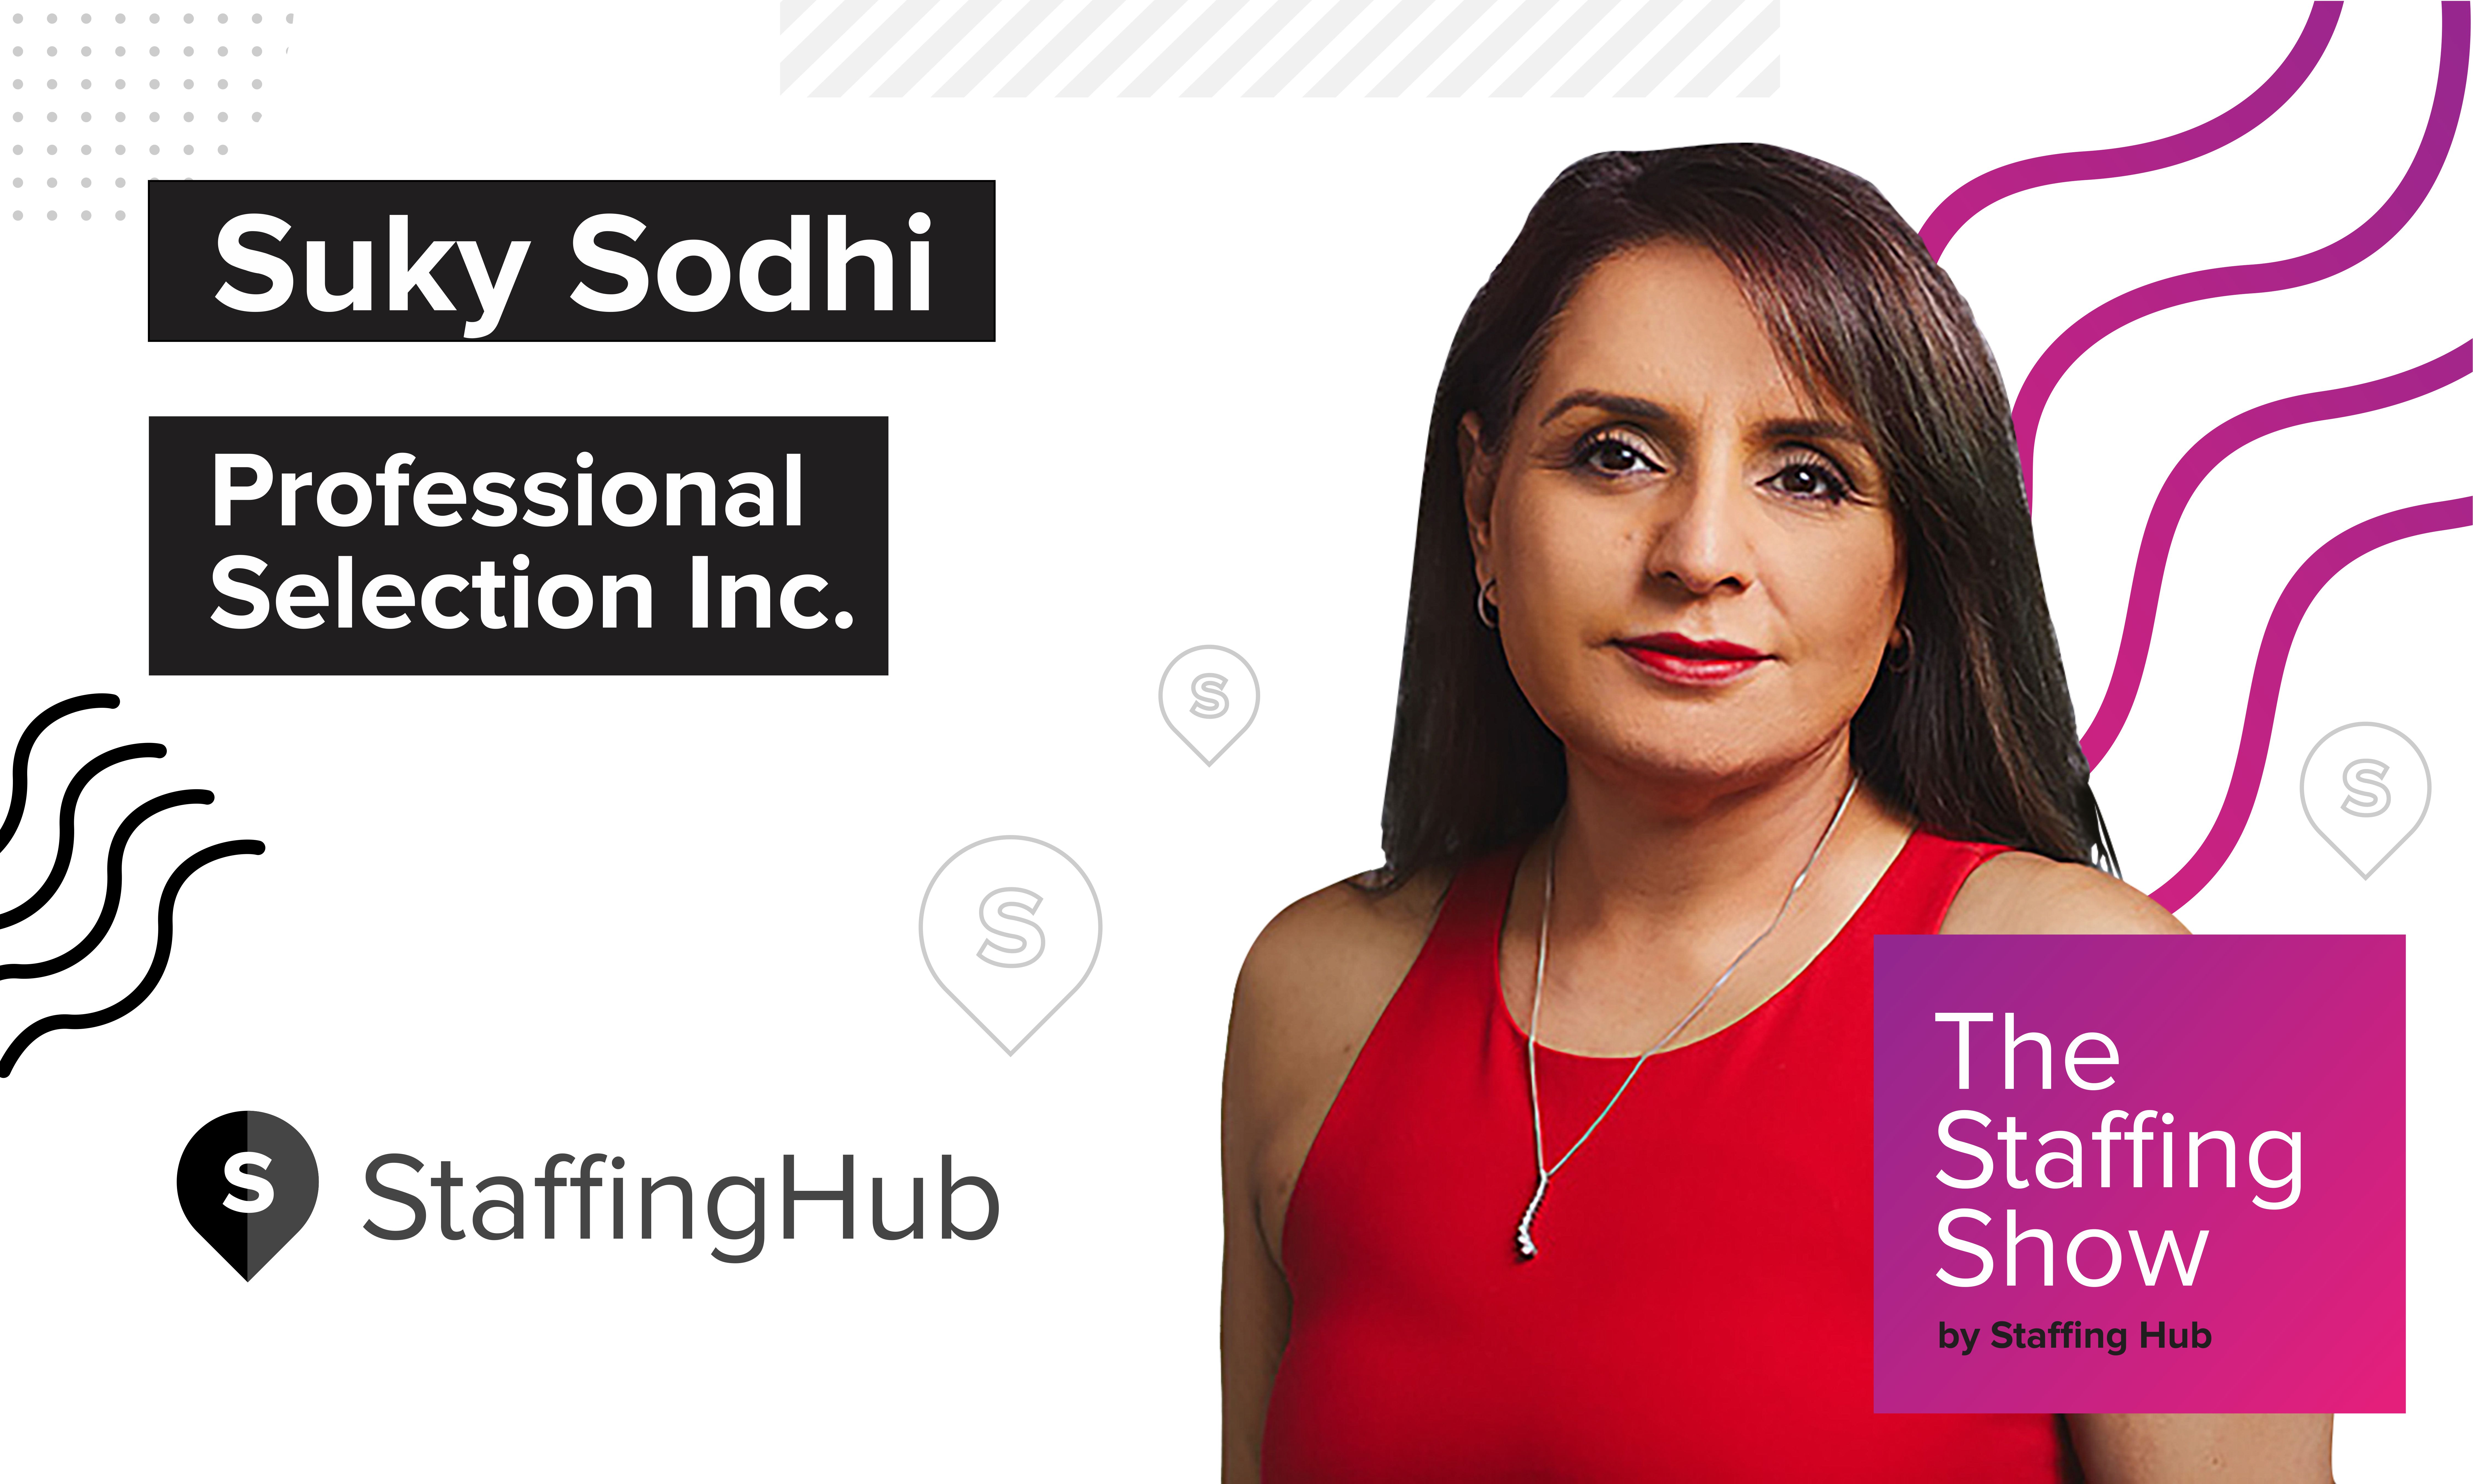 Suky Sodhi of Professional Selection Inc. on Adapting to Change and Holding Yourself Accountable